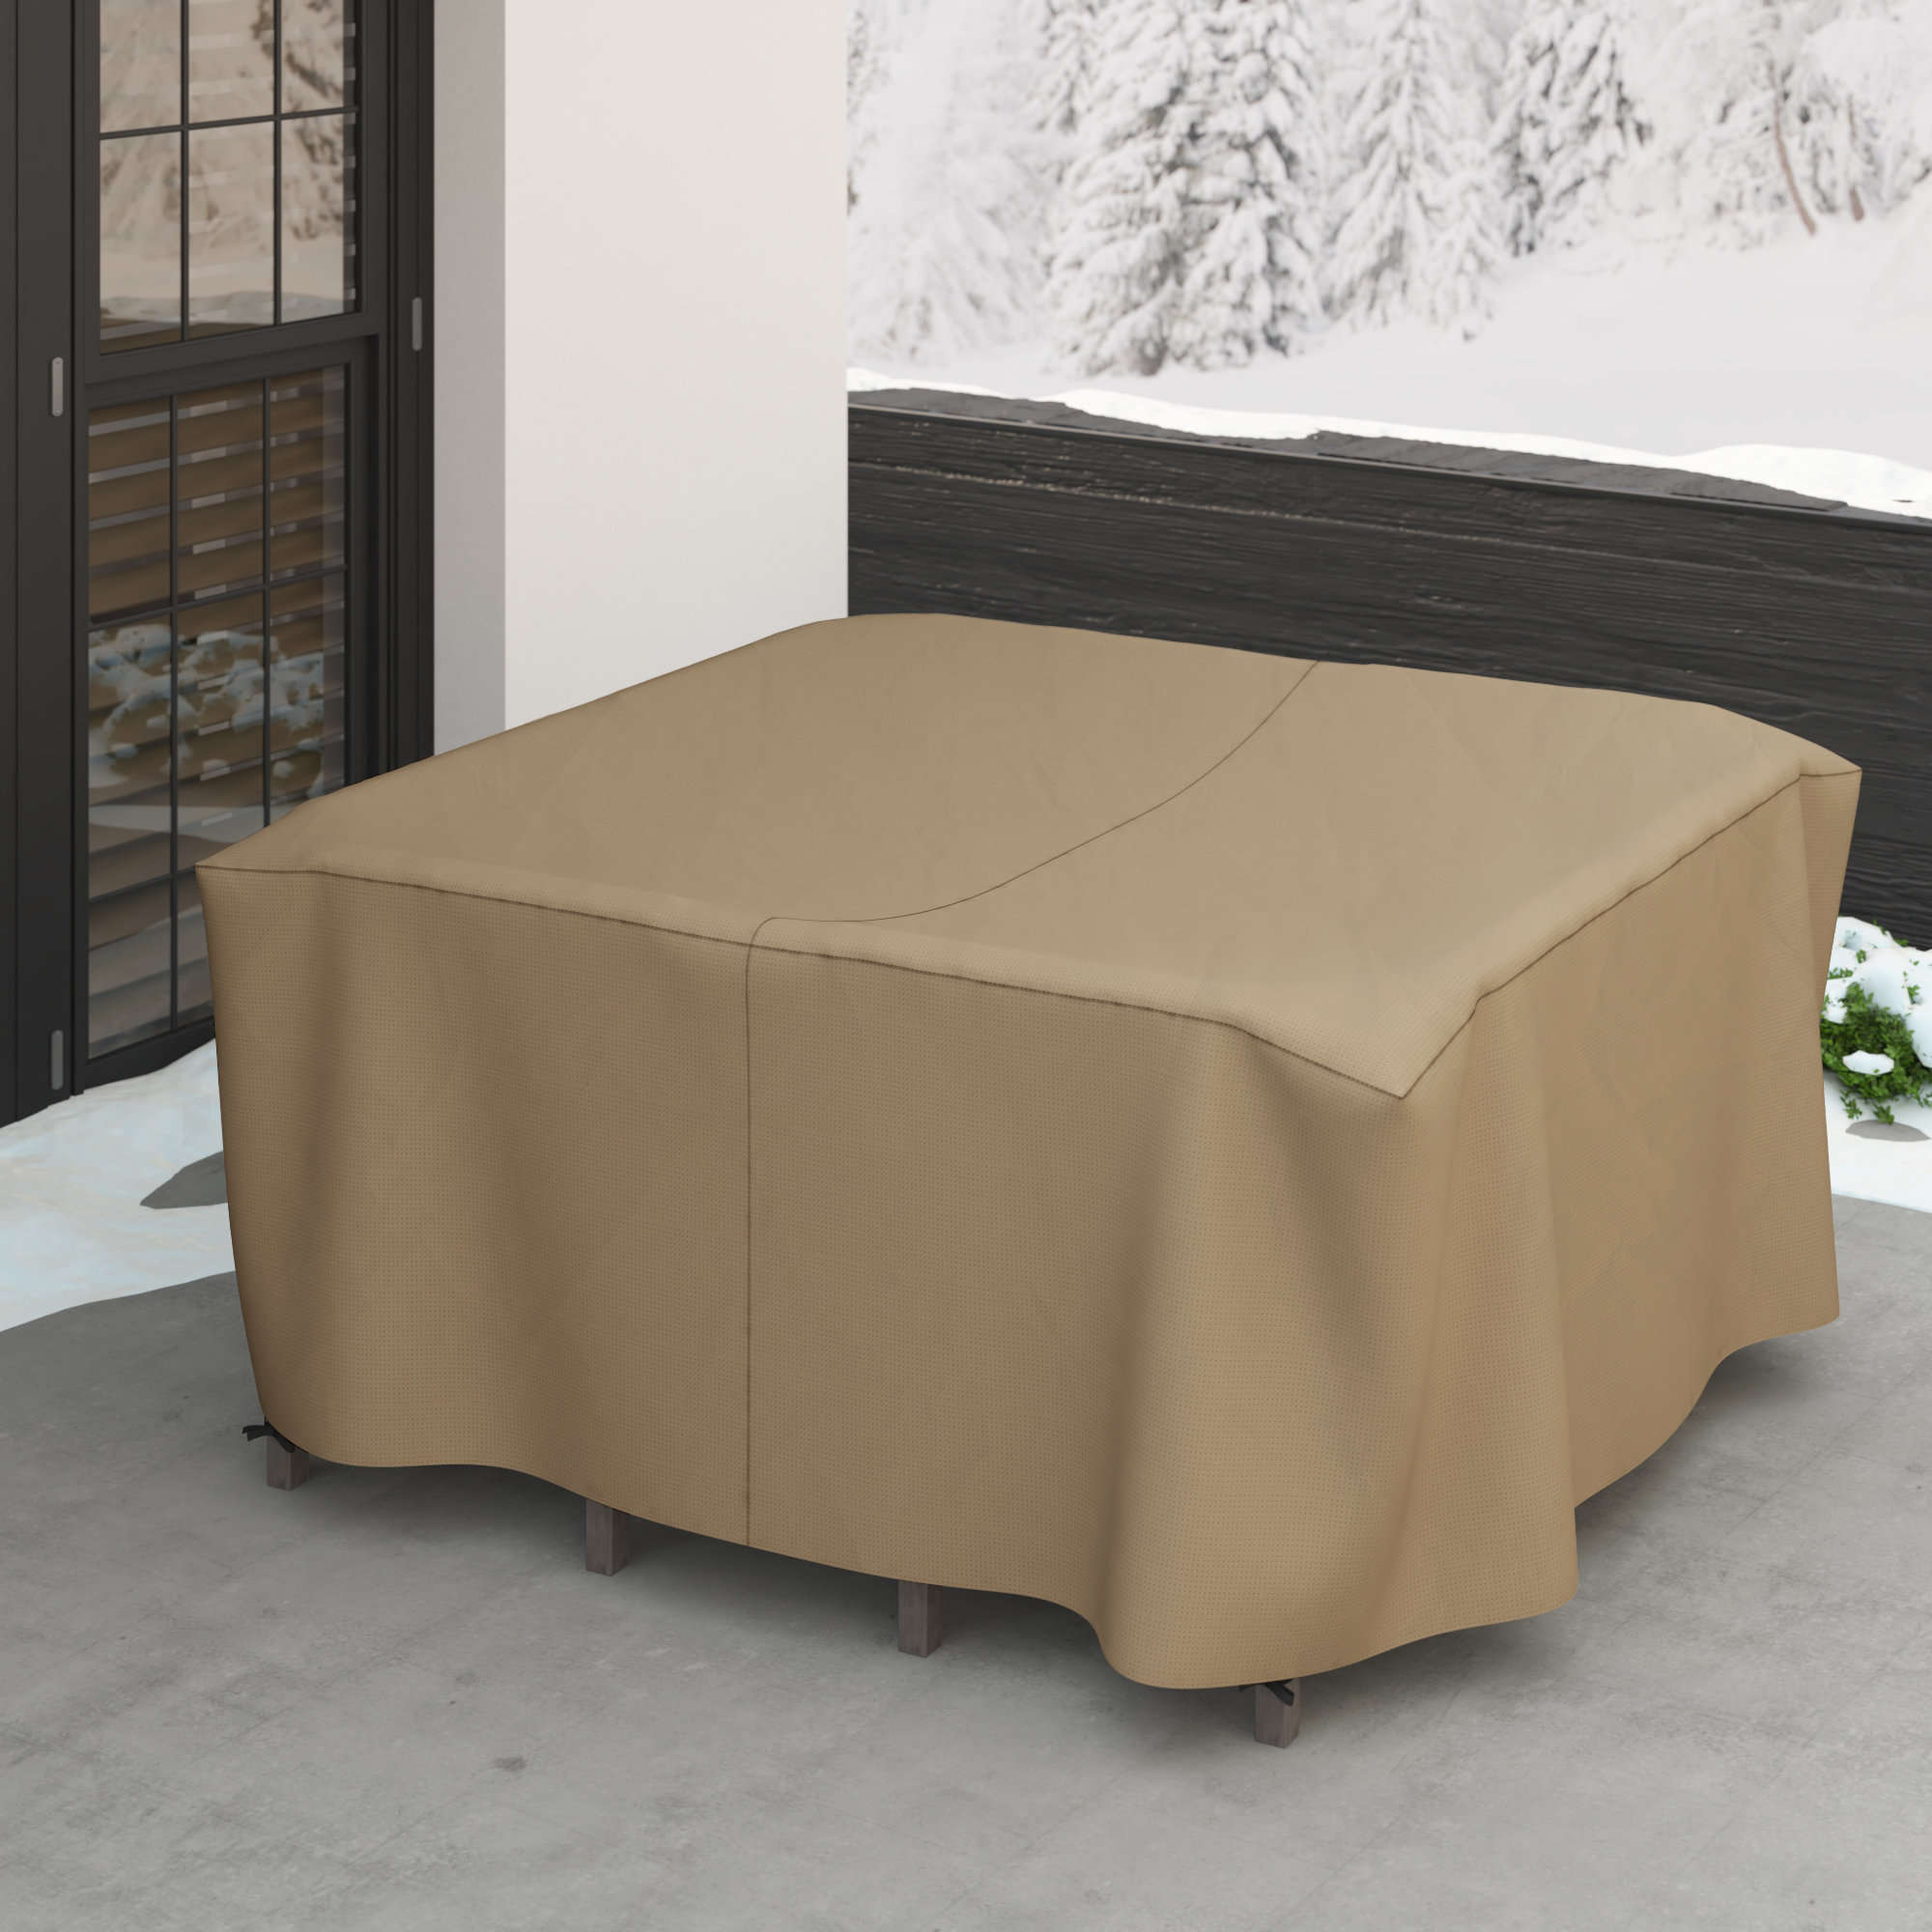 100% Waterproof & Weather Resistant Round Ottoman Cover with Air Pockets & Drawstring for Snug Fit Outdoor Ottoman Cover 12 Oz 24 Dia x 18 H, Beige 